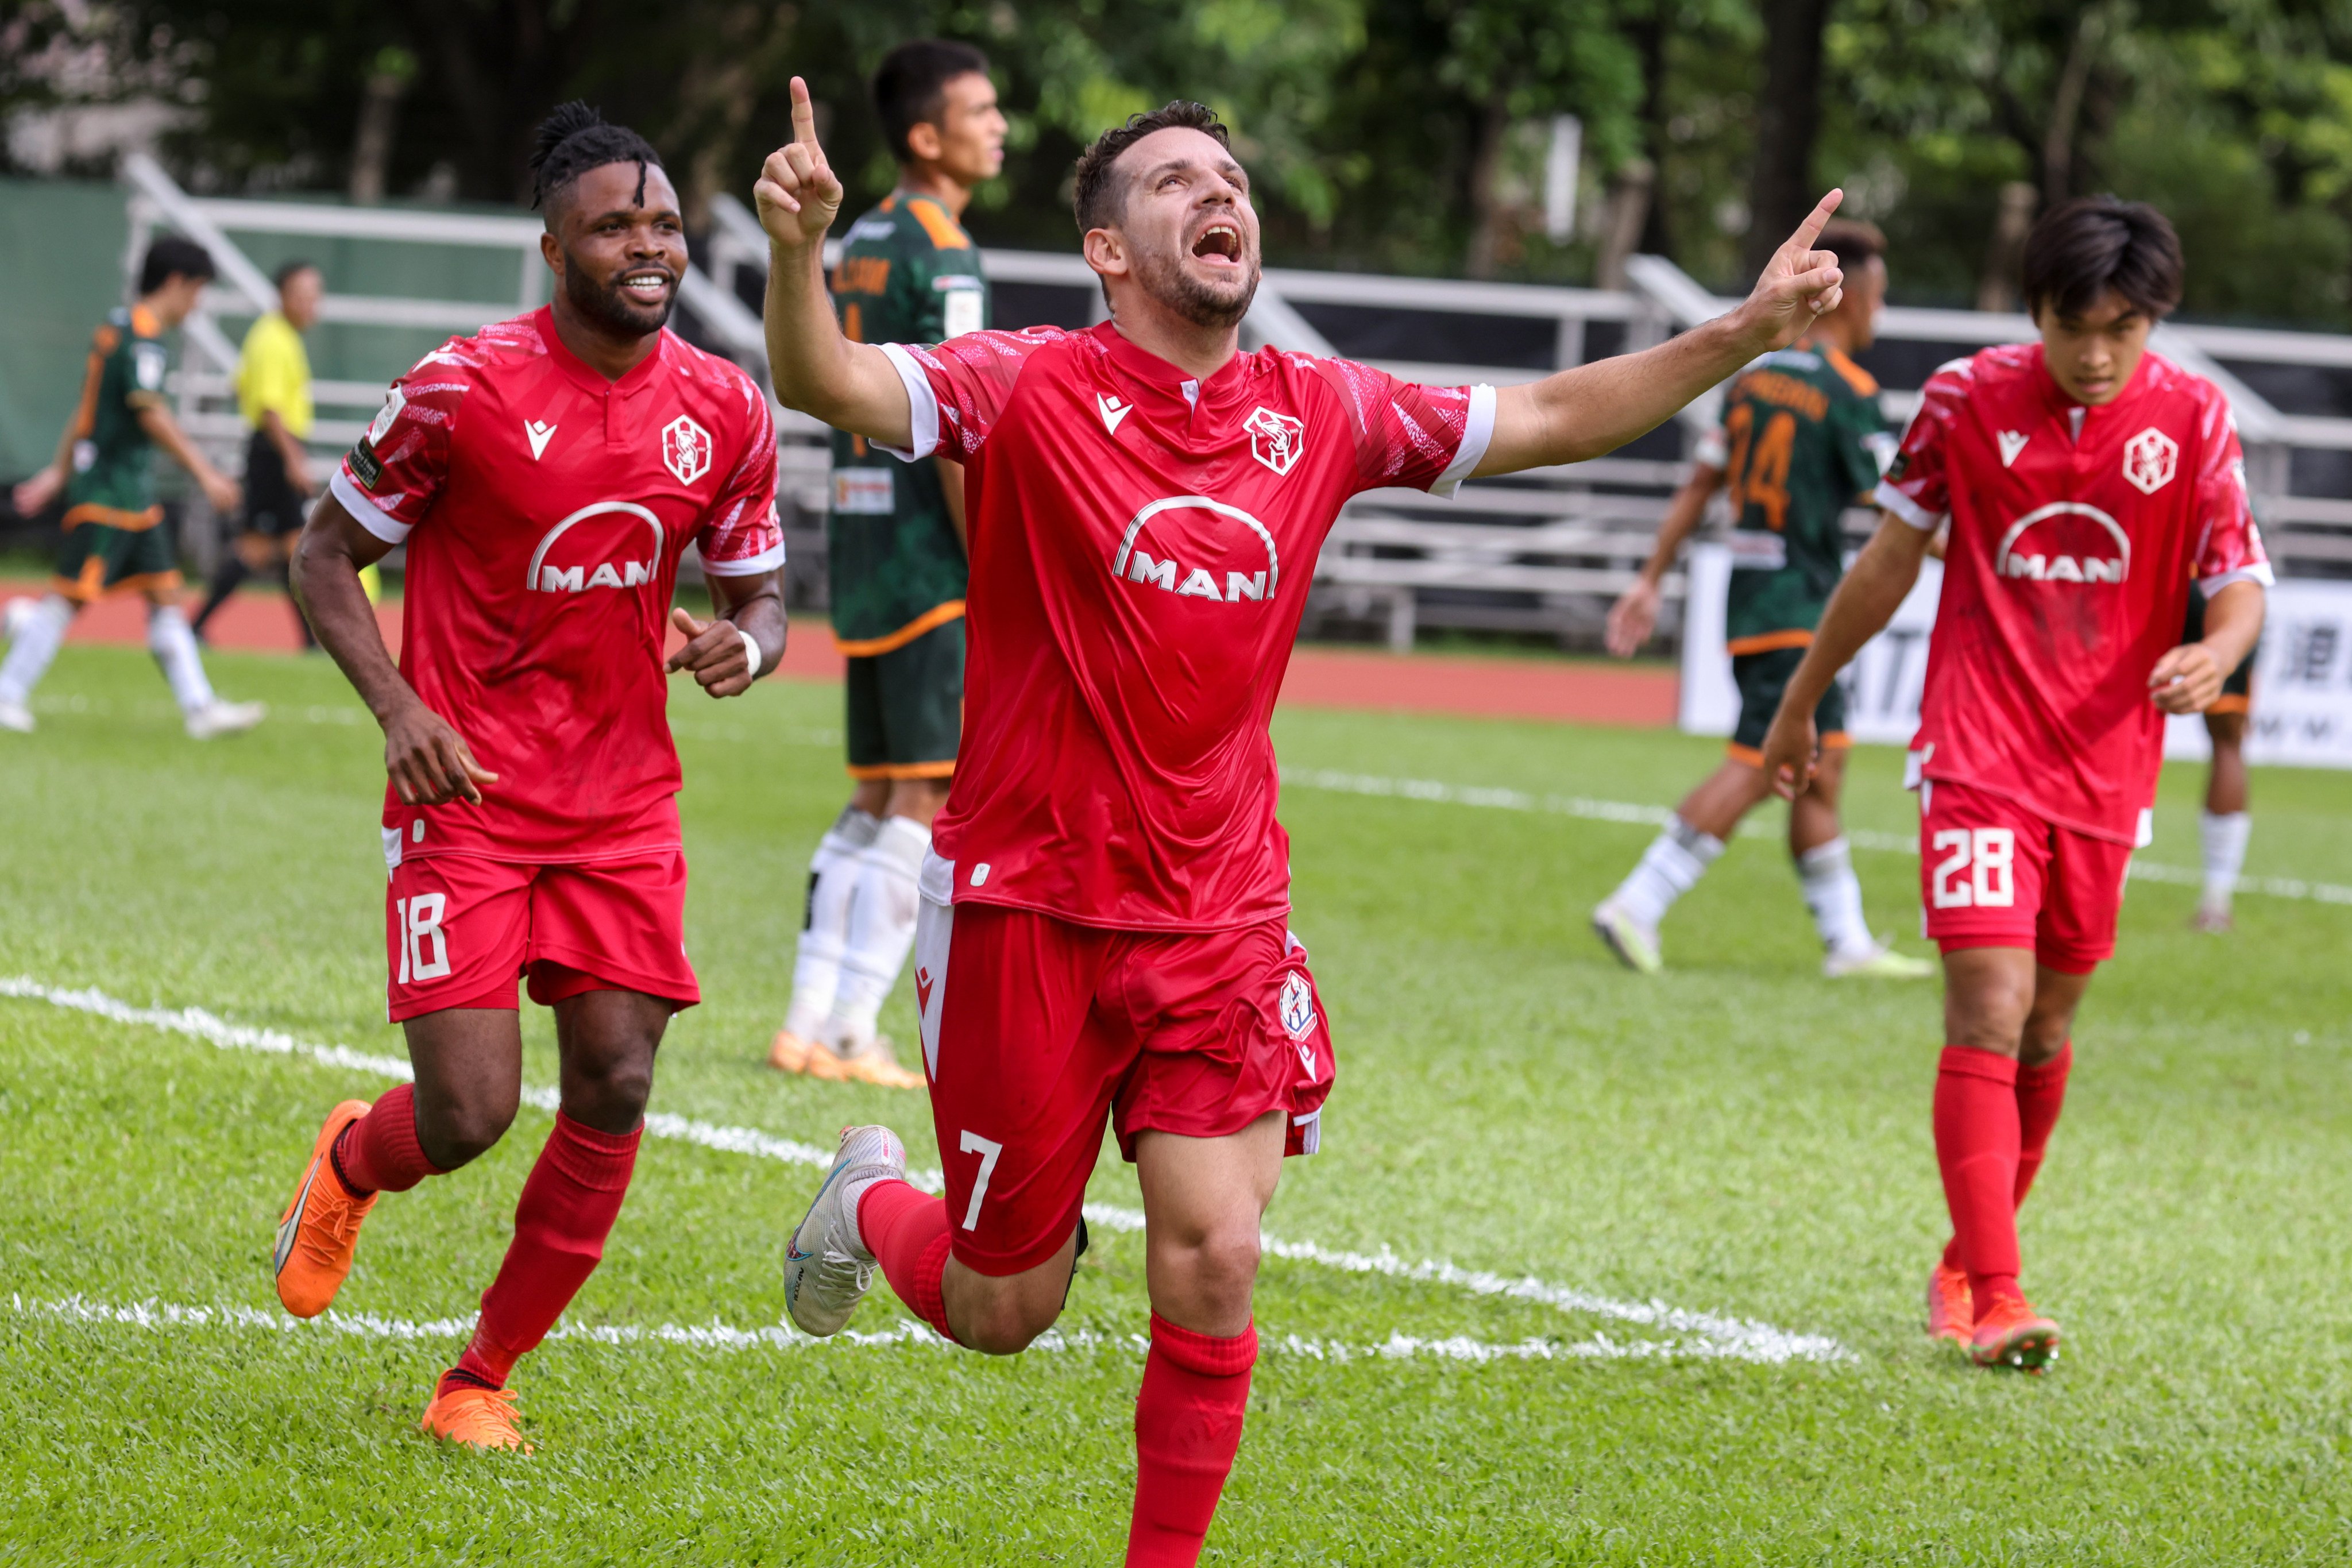 Stefan Pereira (centre) celebrates after scoring for Southern, who released him at the end of the season. Photo: Yik Yeung-man